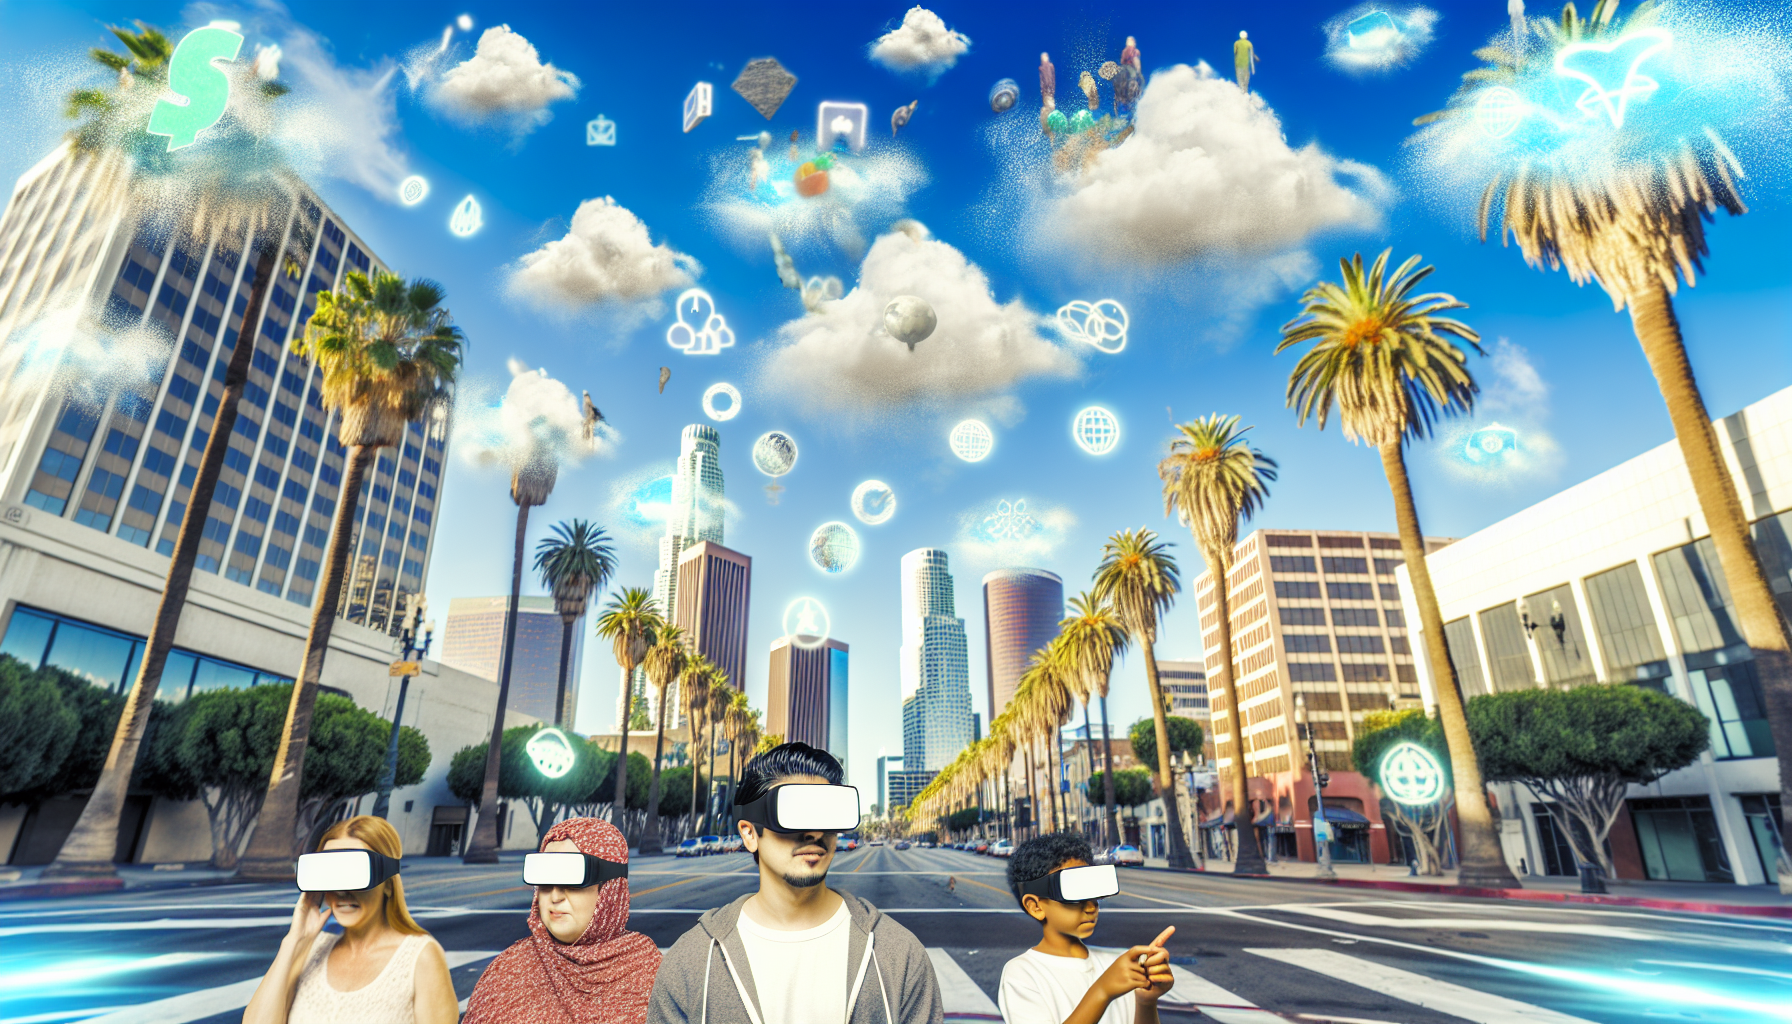 Immersive AR Experiences in Los Angeles